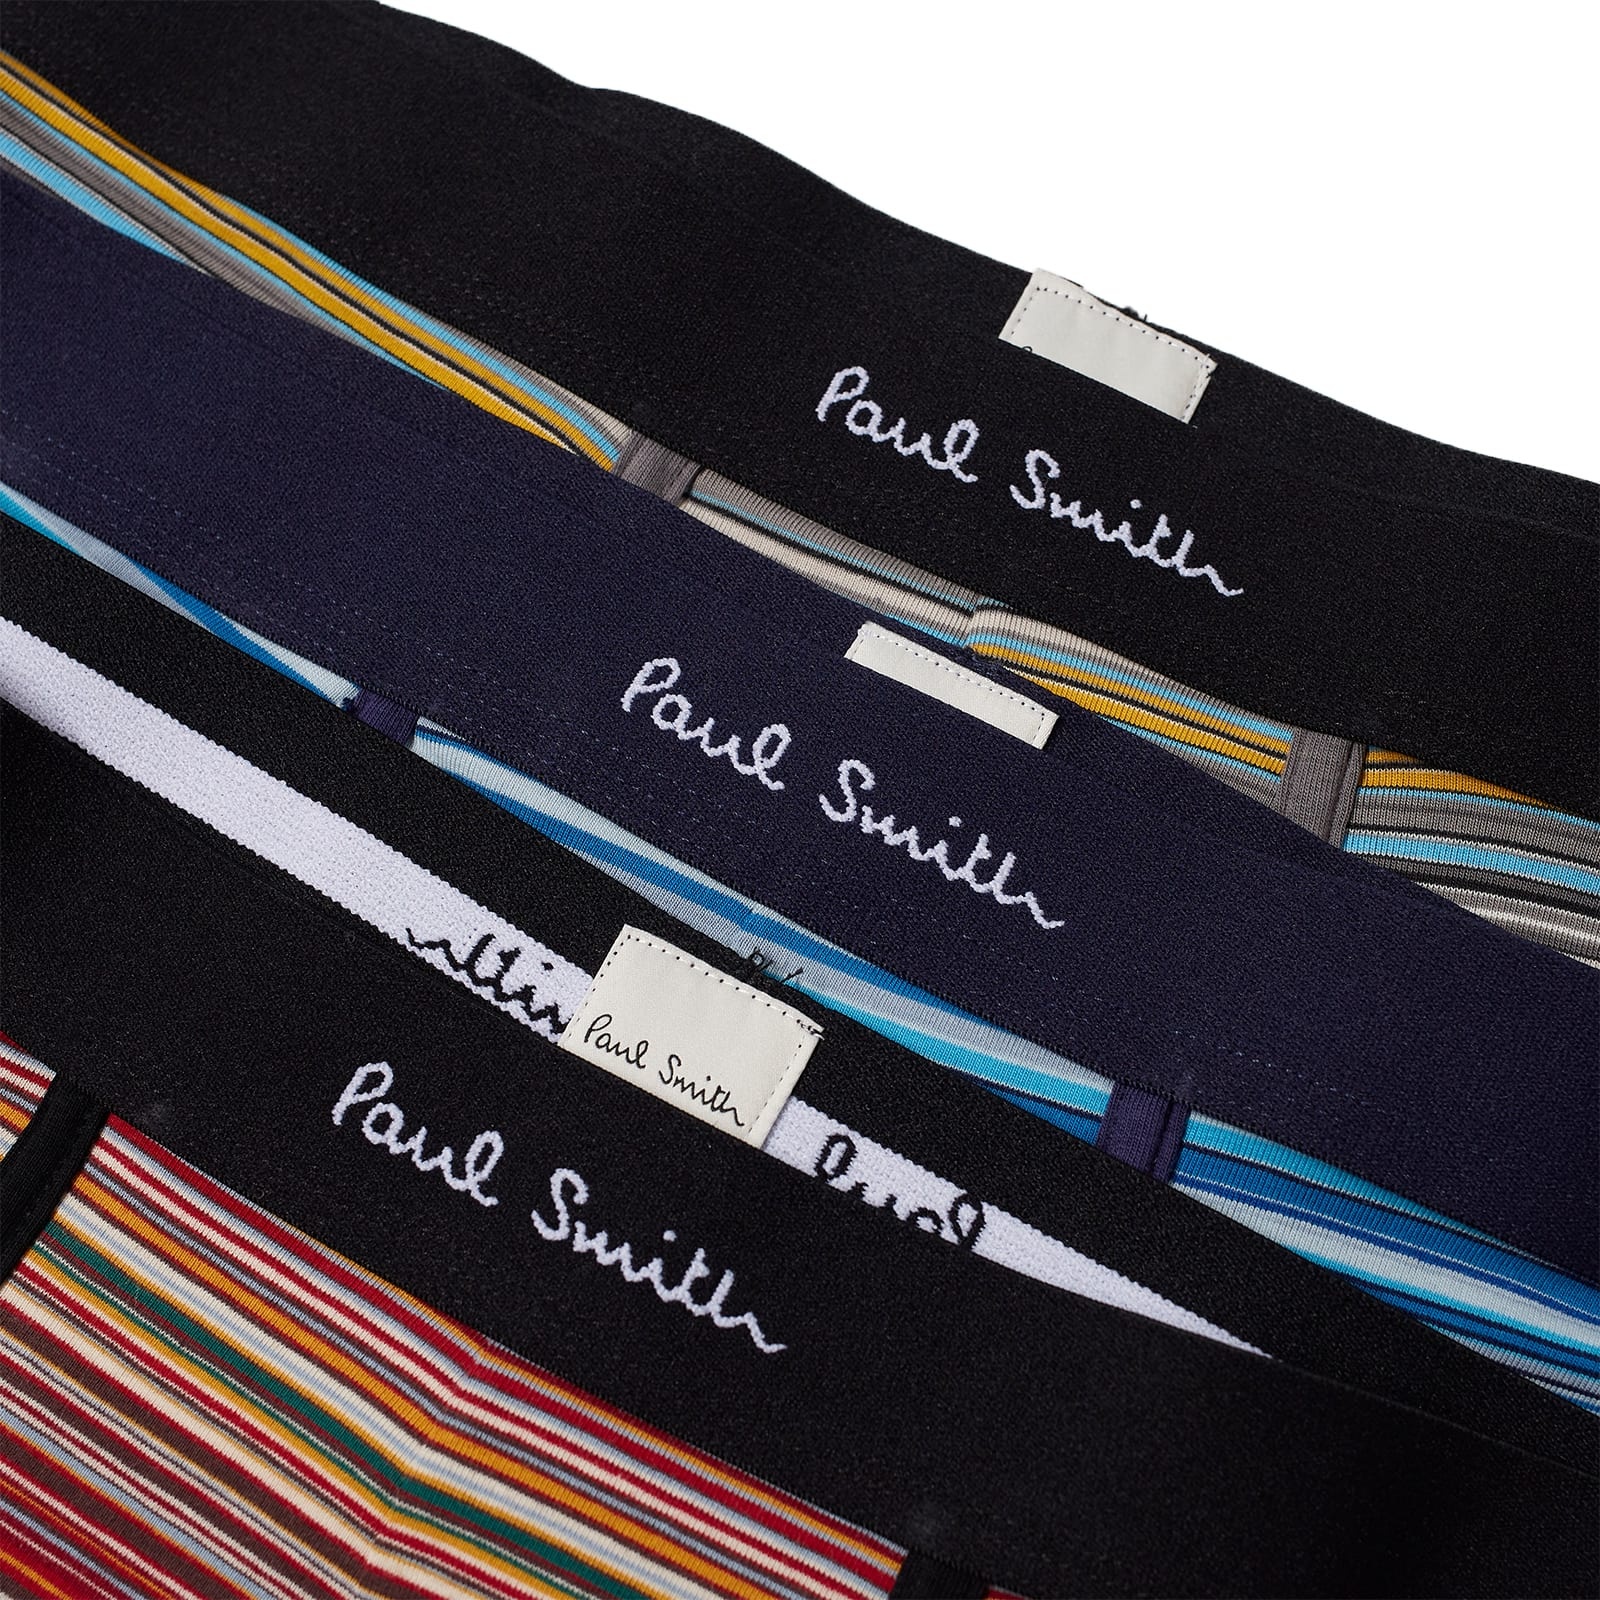 Paul Smith Trunk - 3 Pack - 2